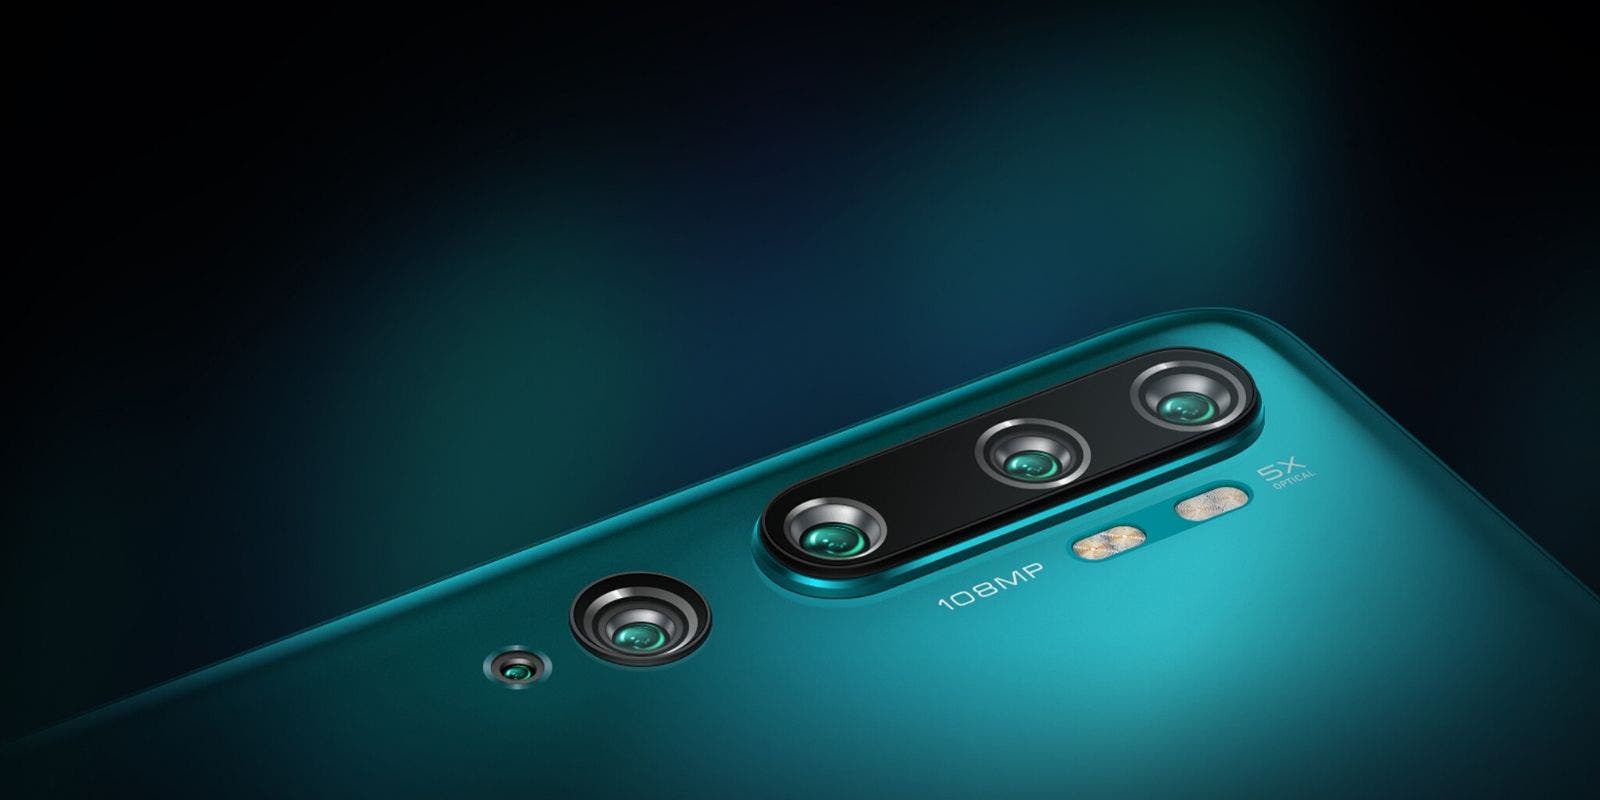 Xiaomi Mi CC10 Protective Case Shows The Design Of The Device In Its Full Glory